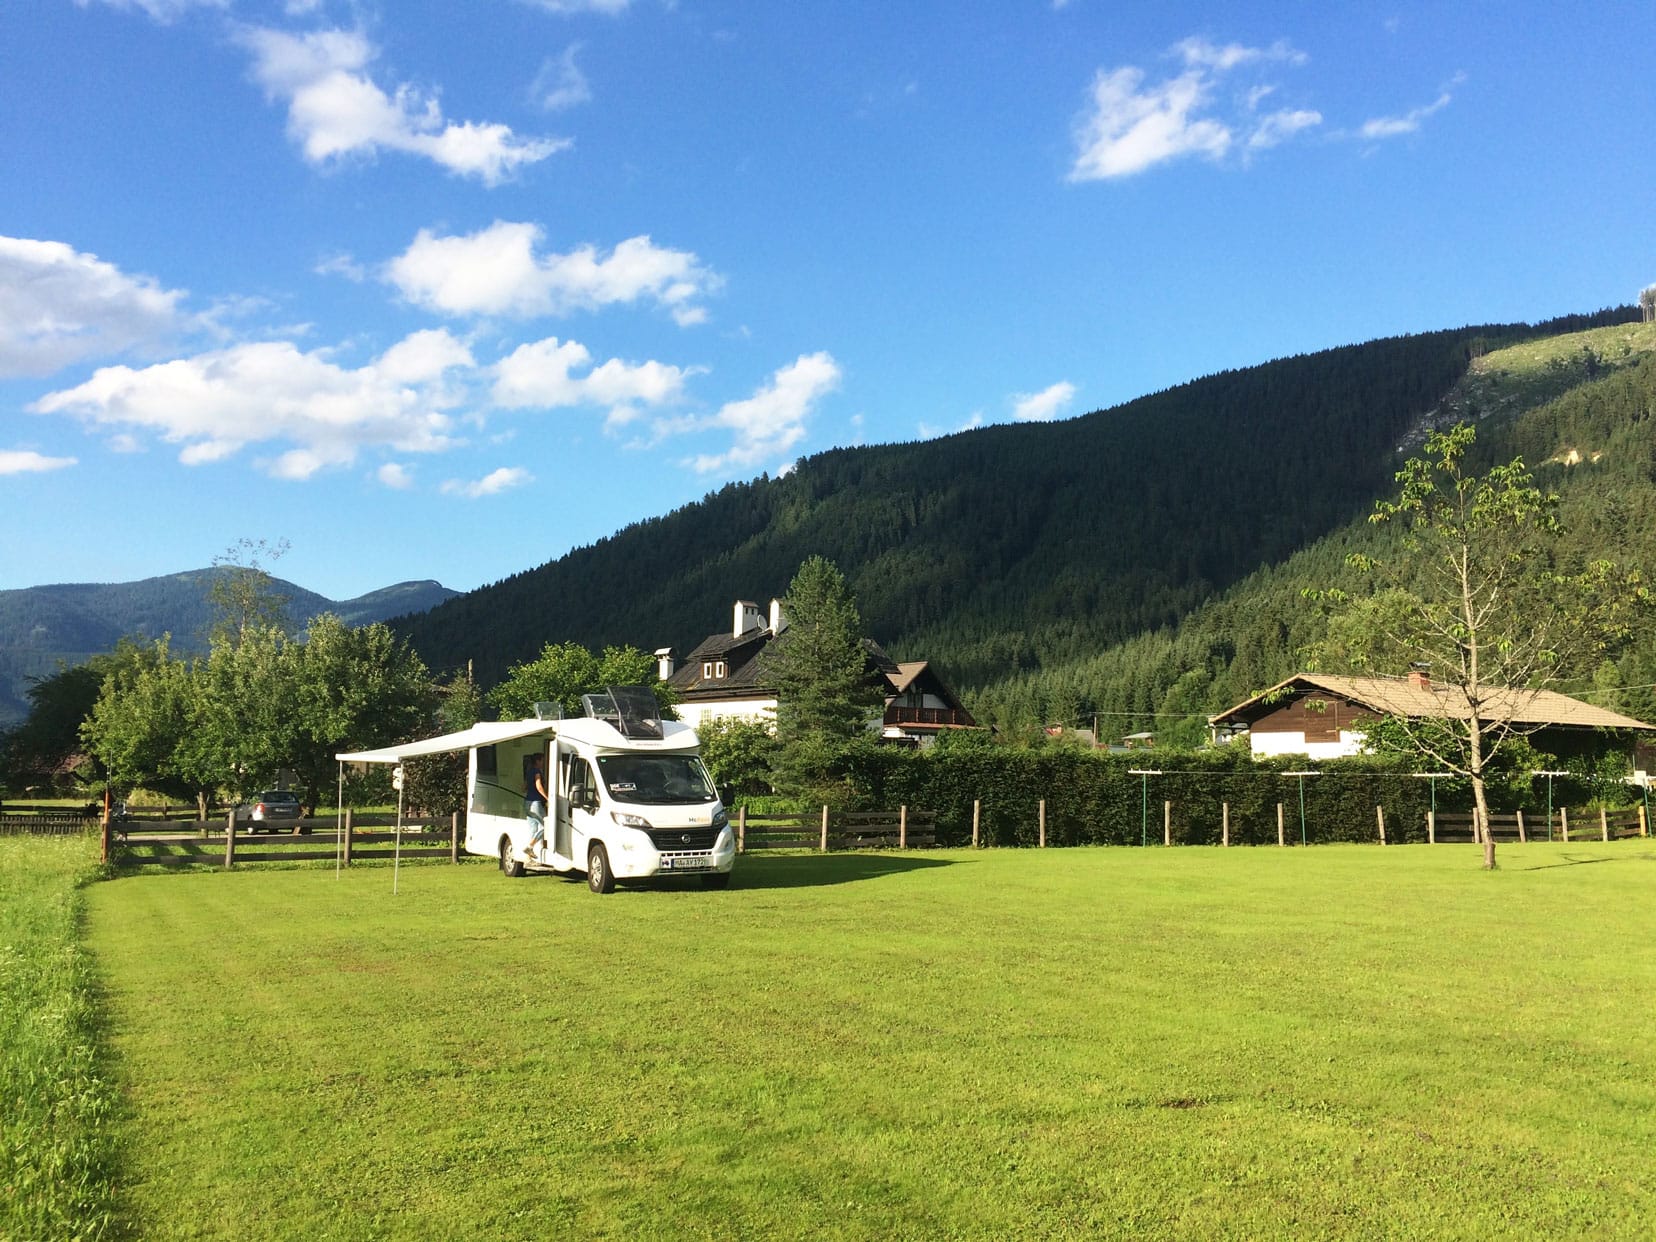 Motorhome parked in large green field in Austria with green tree covered mountains in the background